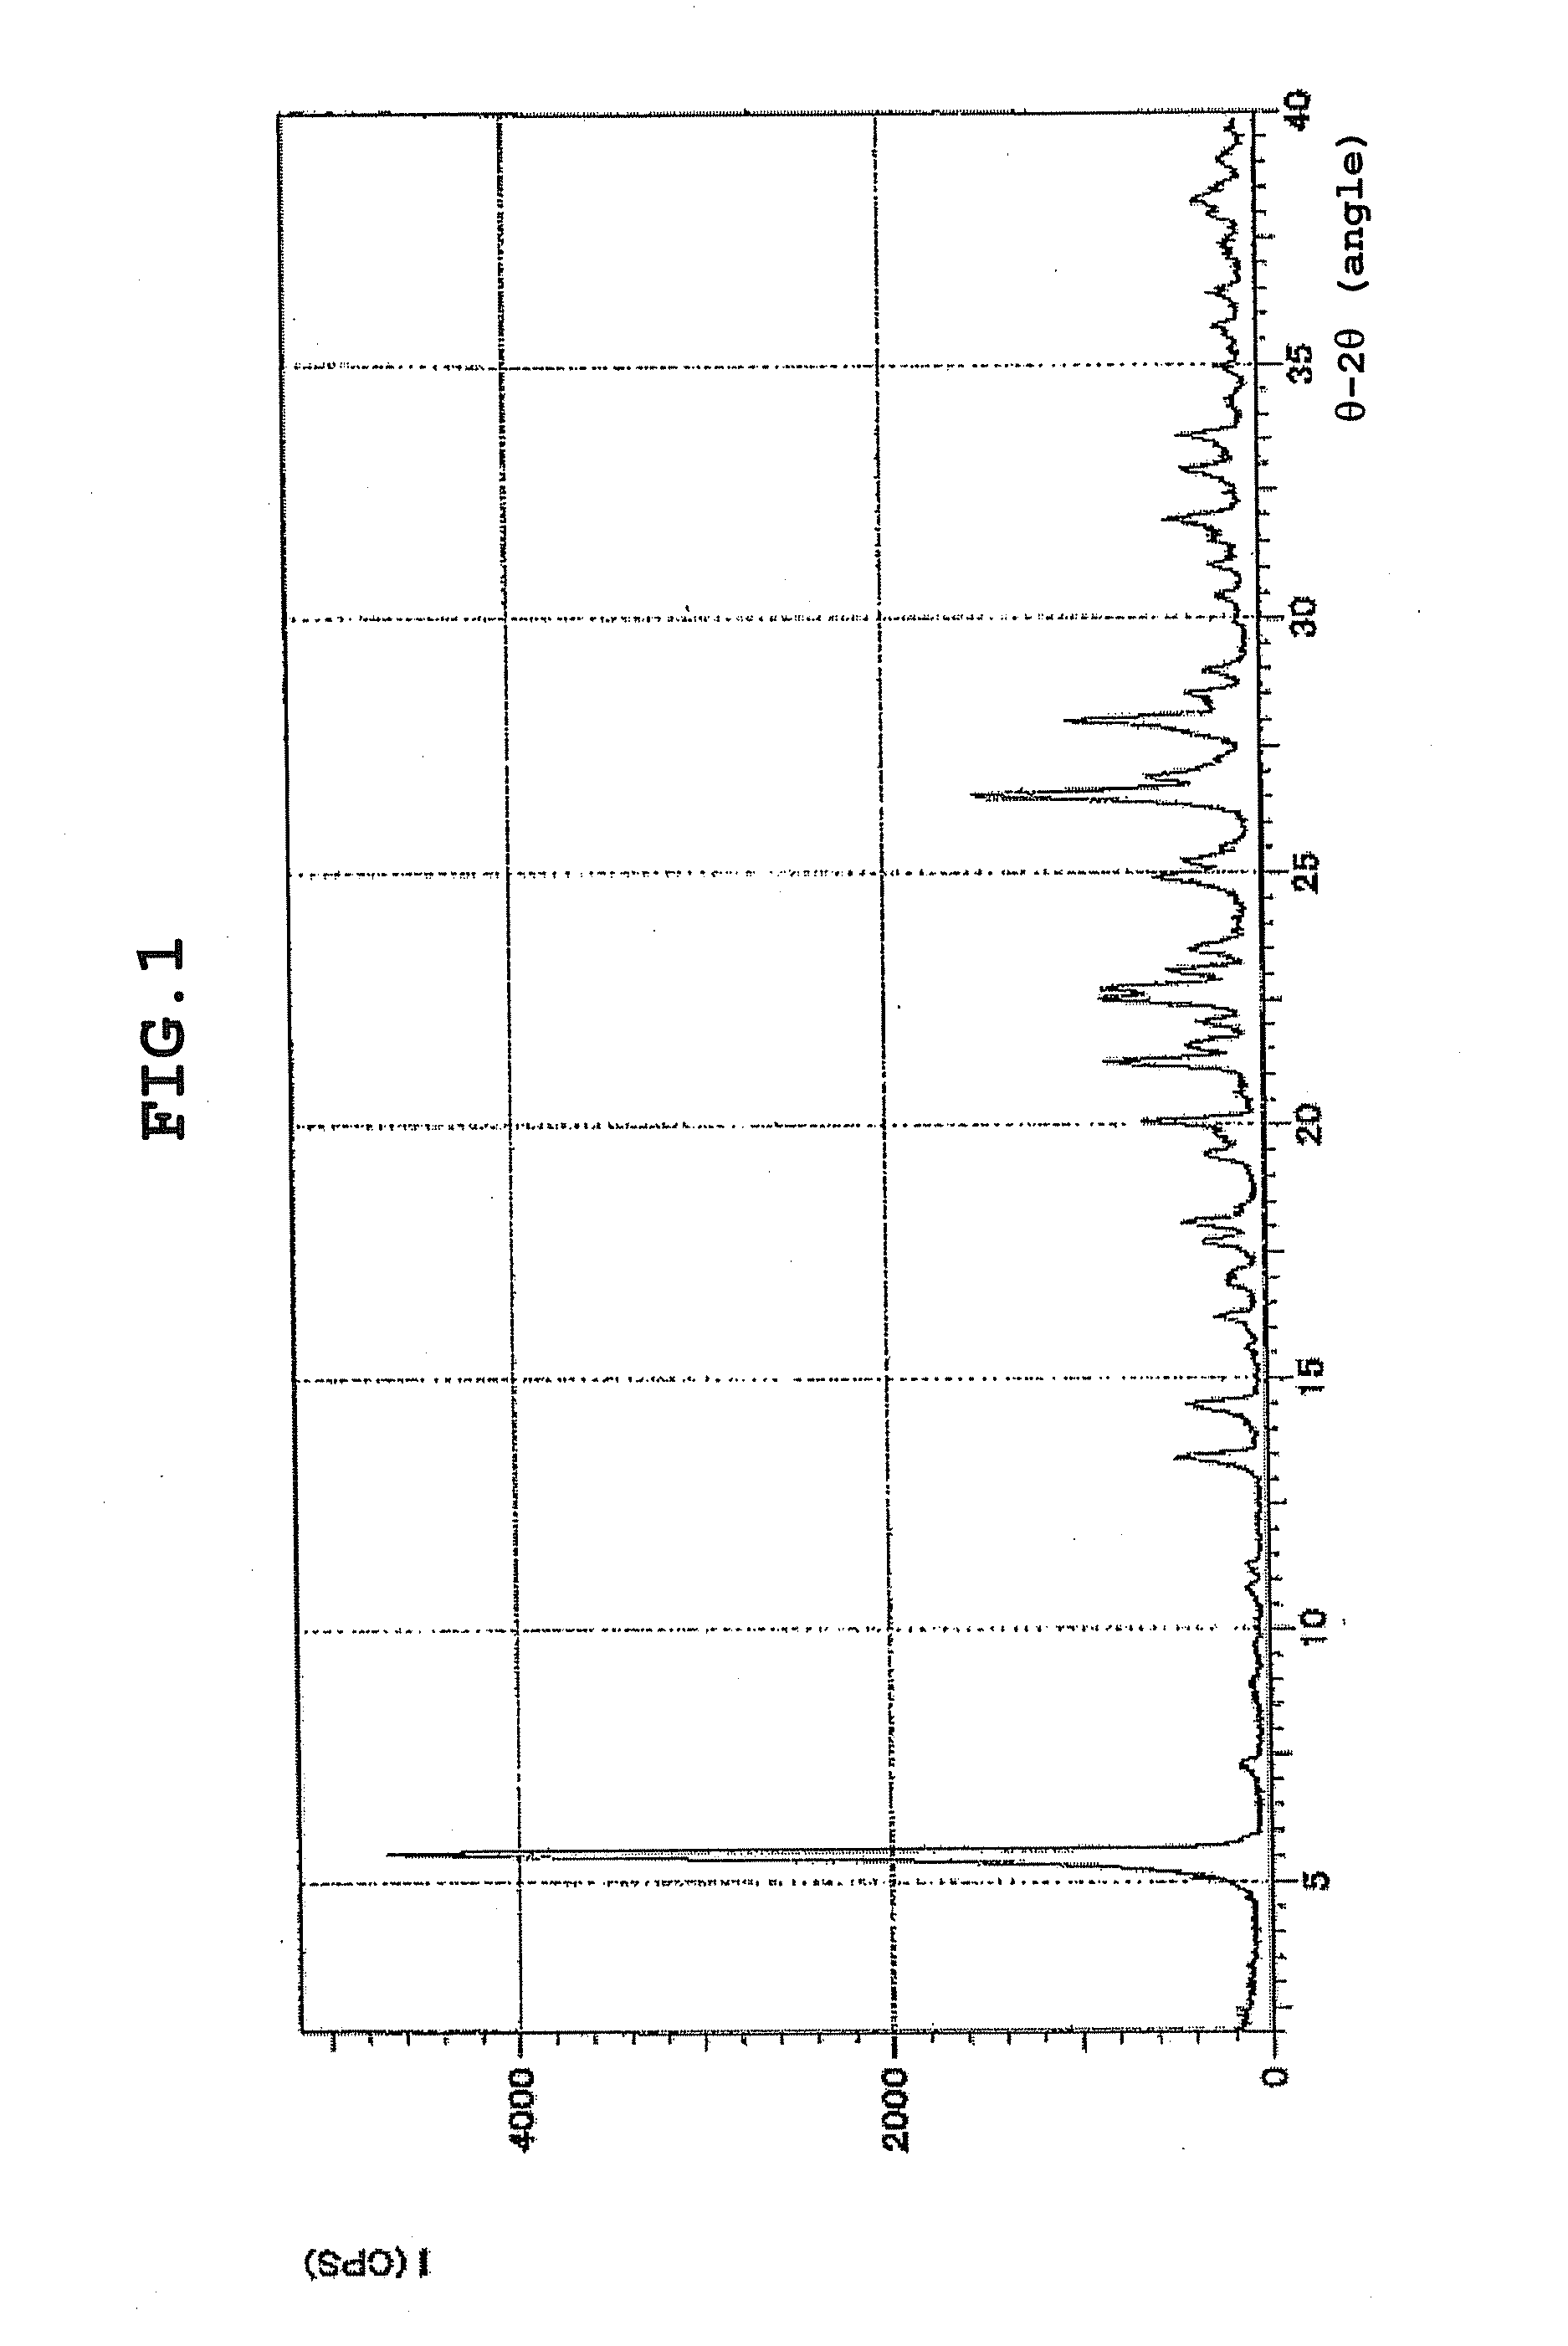 Salt of proline derivative, solvate thereof, and production method thereof